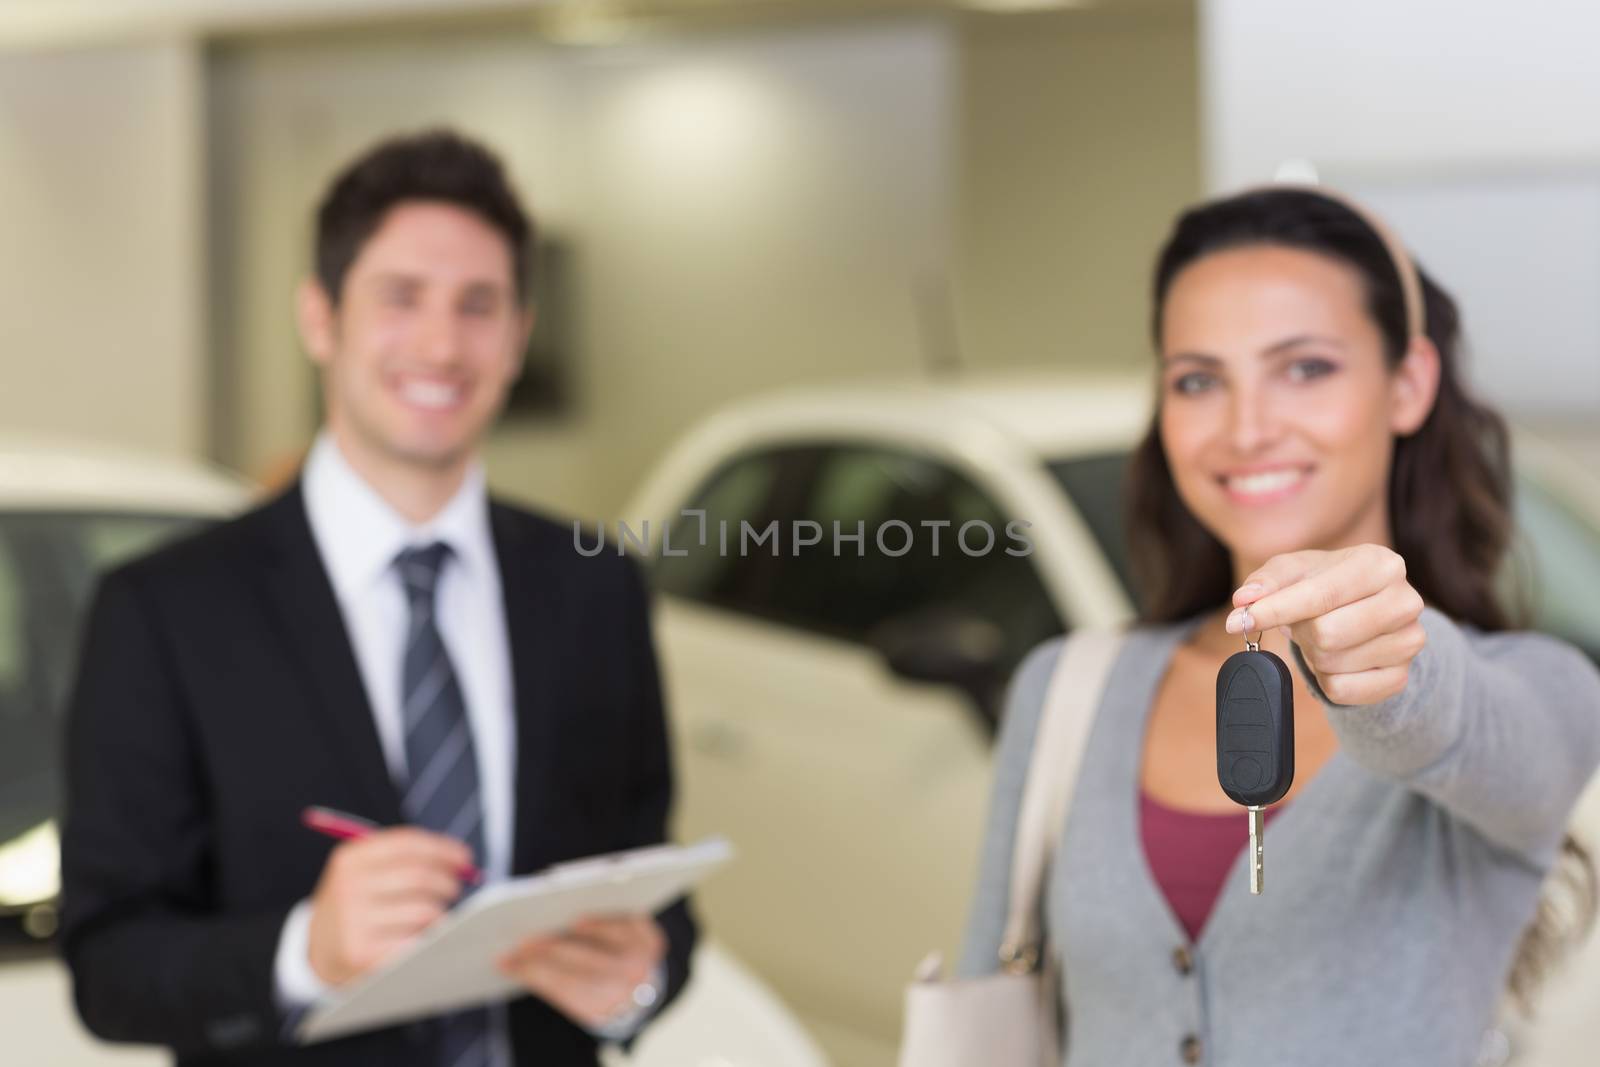 Female driver showing a key after bying a new car at new car showroom